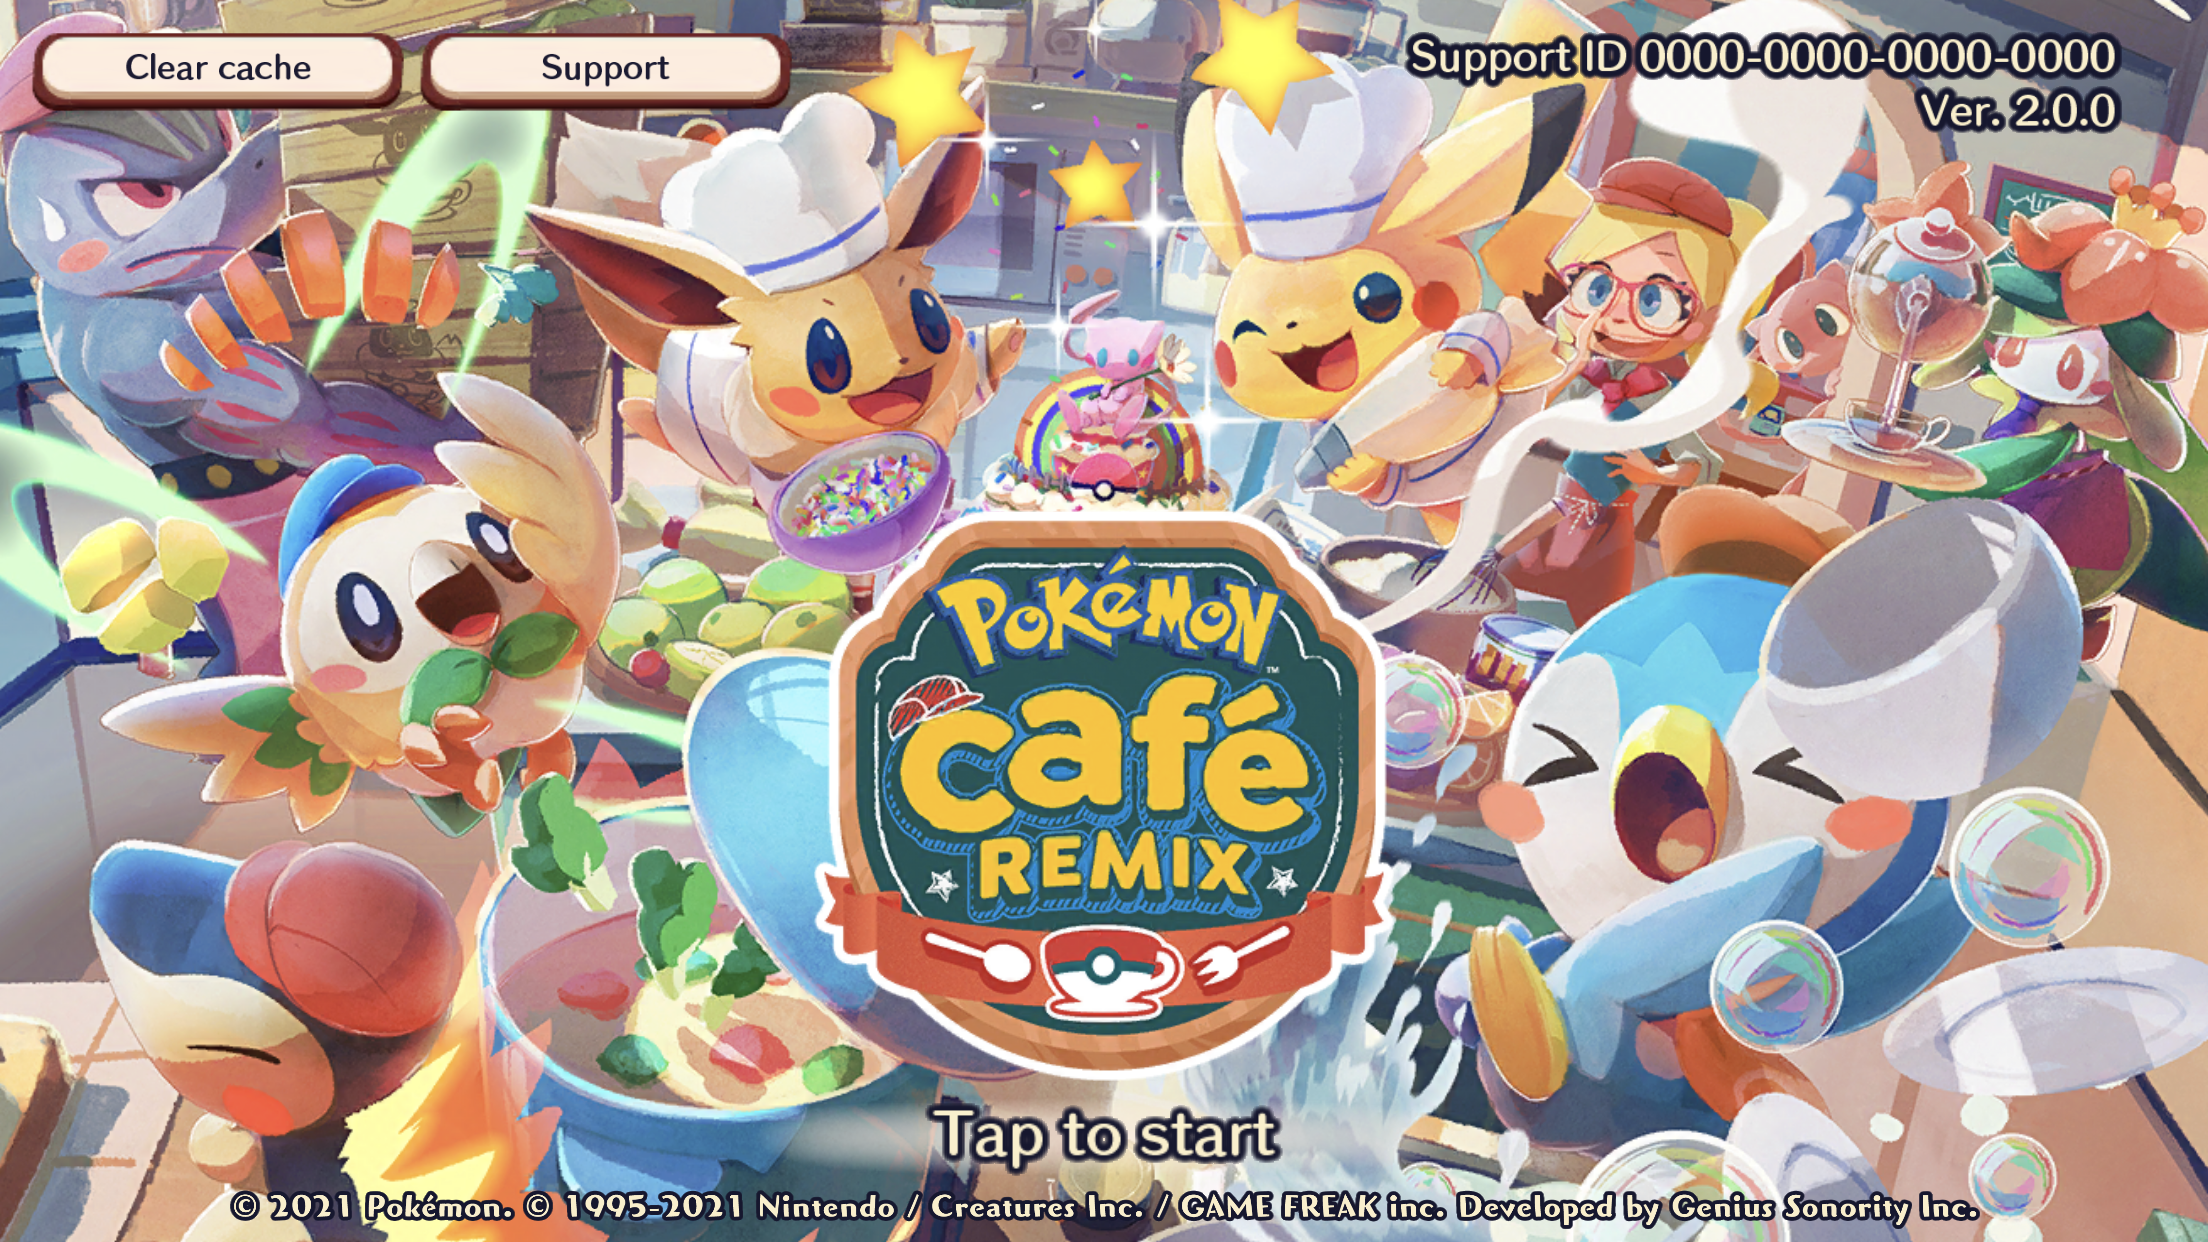 Mobile game Pokémon Café Mix gets ReMix name change and update